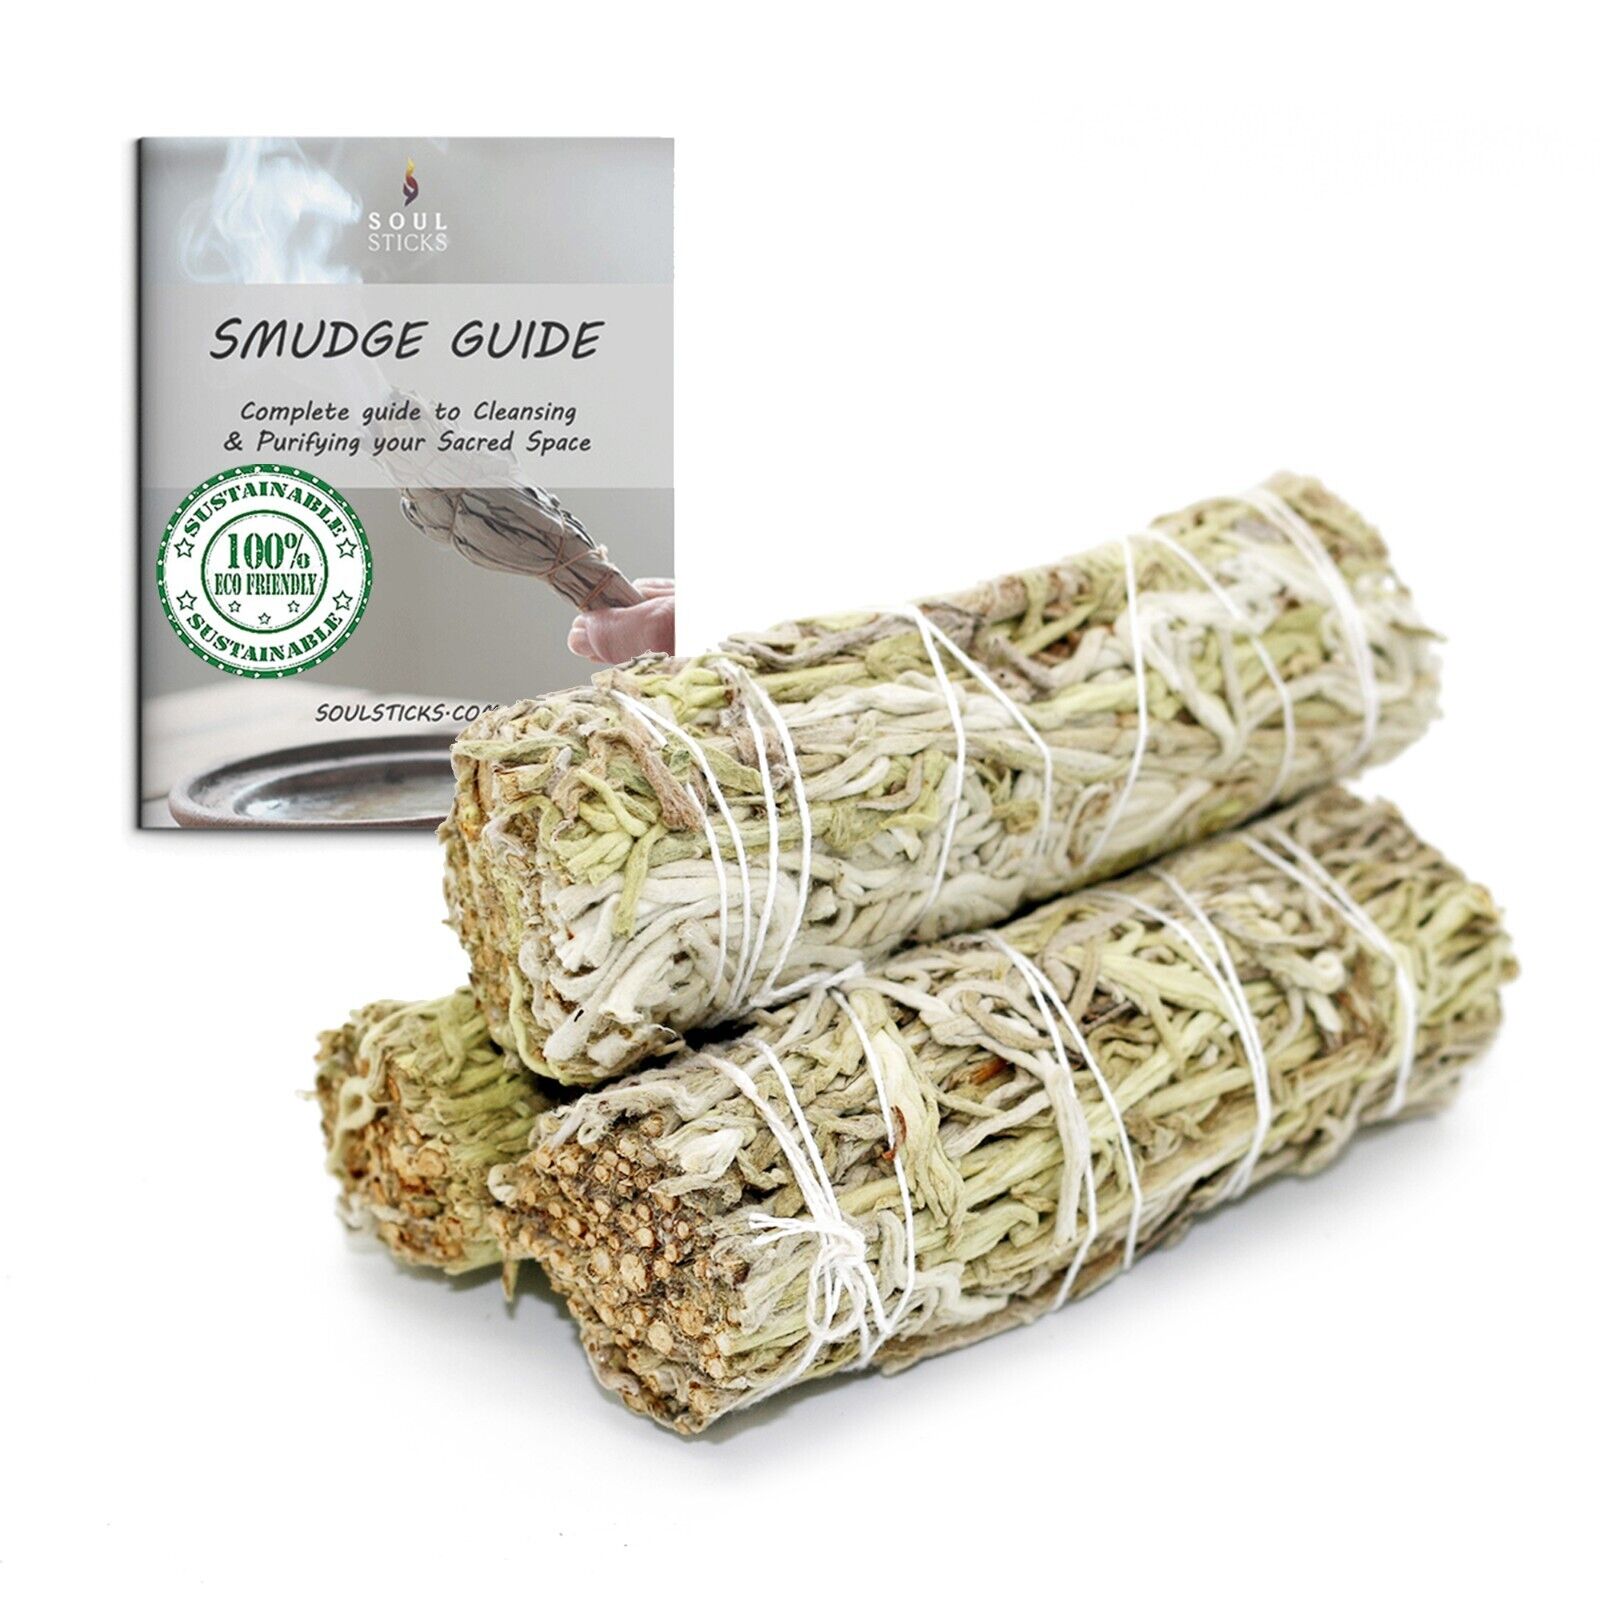 3 Pack 4 inch Green Dried Mullein Sage with Smudge Guide